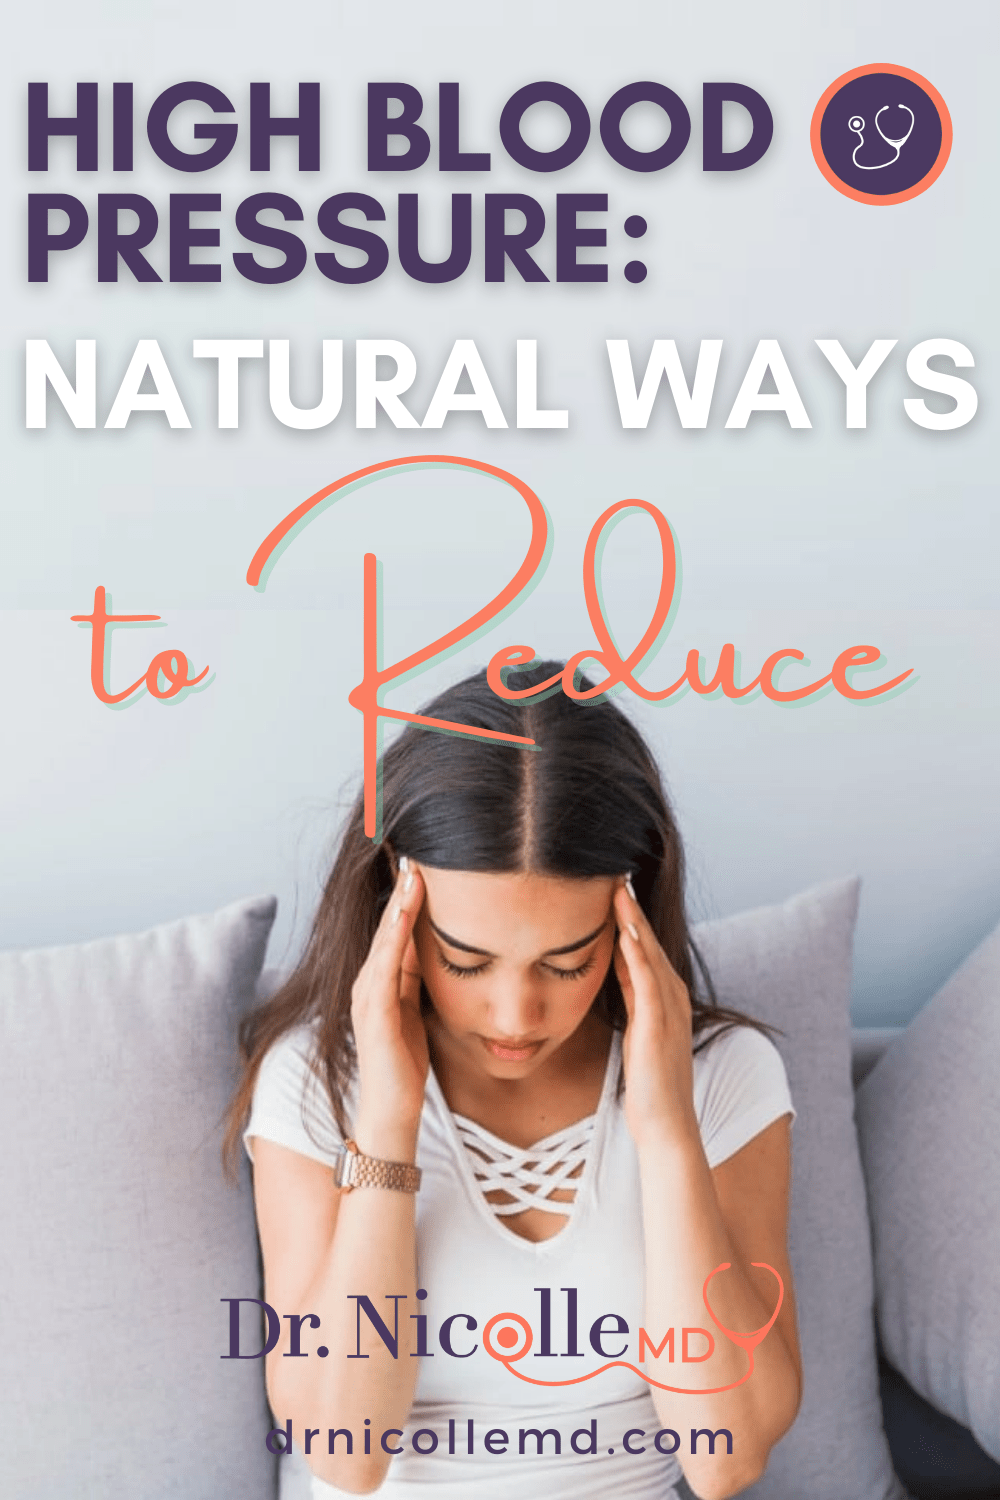 High Blood Pressure: Natural Ways To Reduce